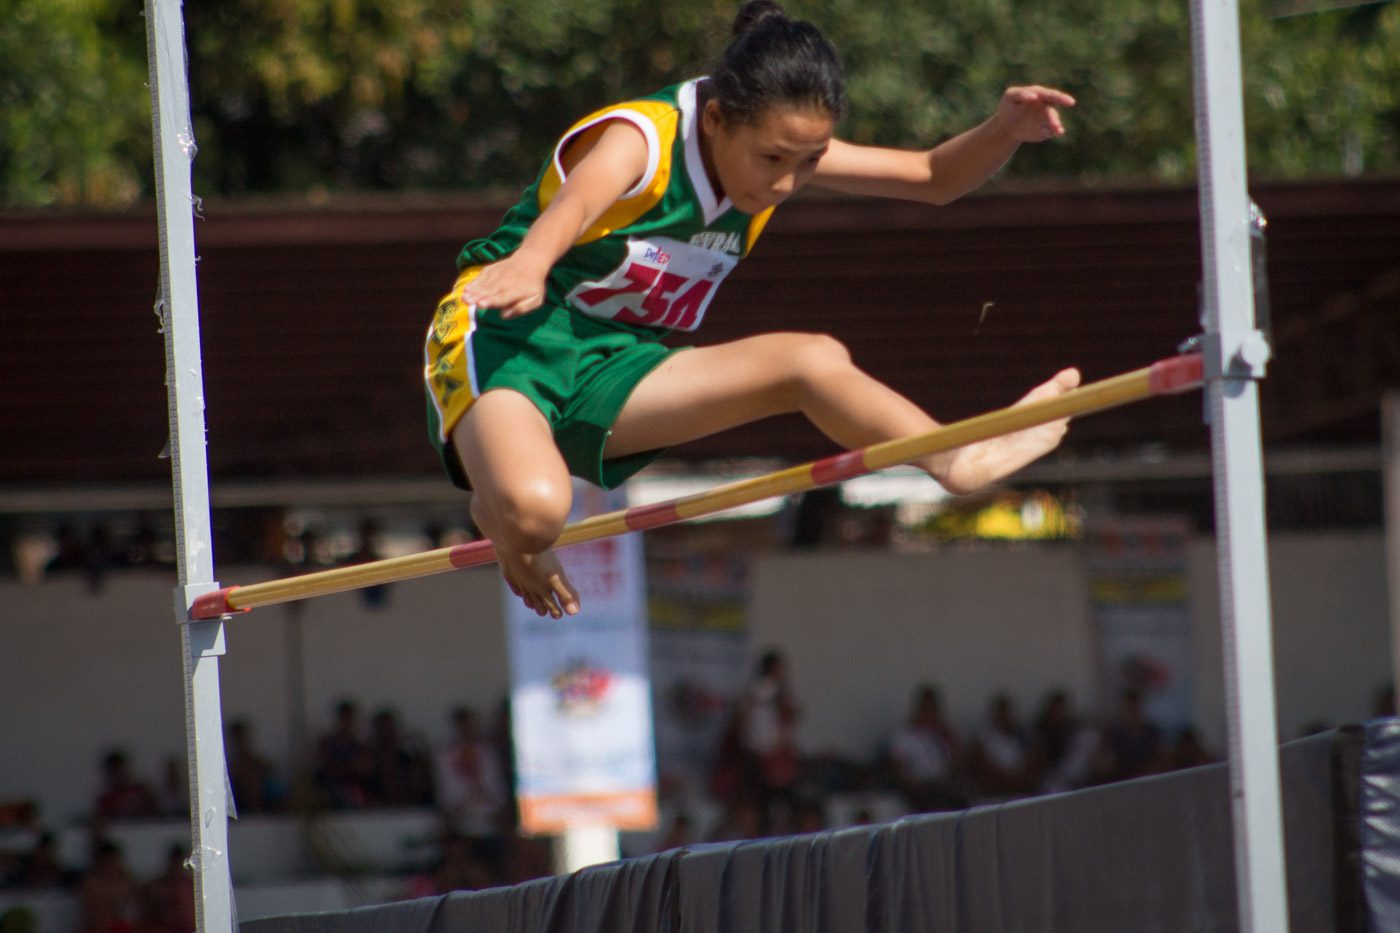 AIM BIG, LEAP HIGH. An Eastern Visayas athlete takes an extra effort to escalate the challenge of the high jump athletic event at the Binarayan Sports Complex 